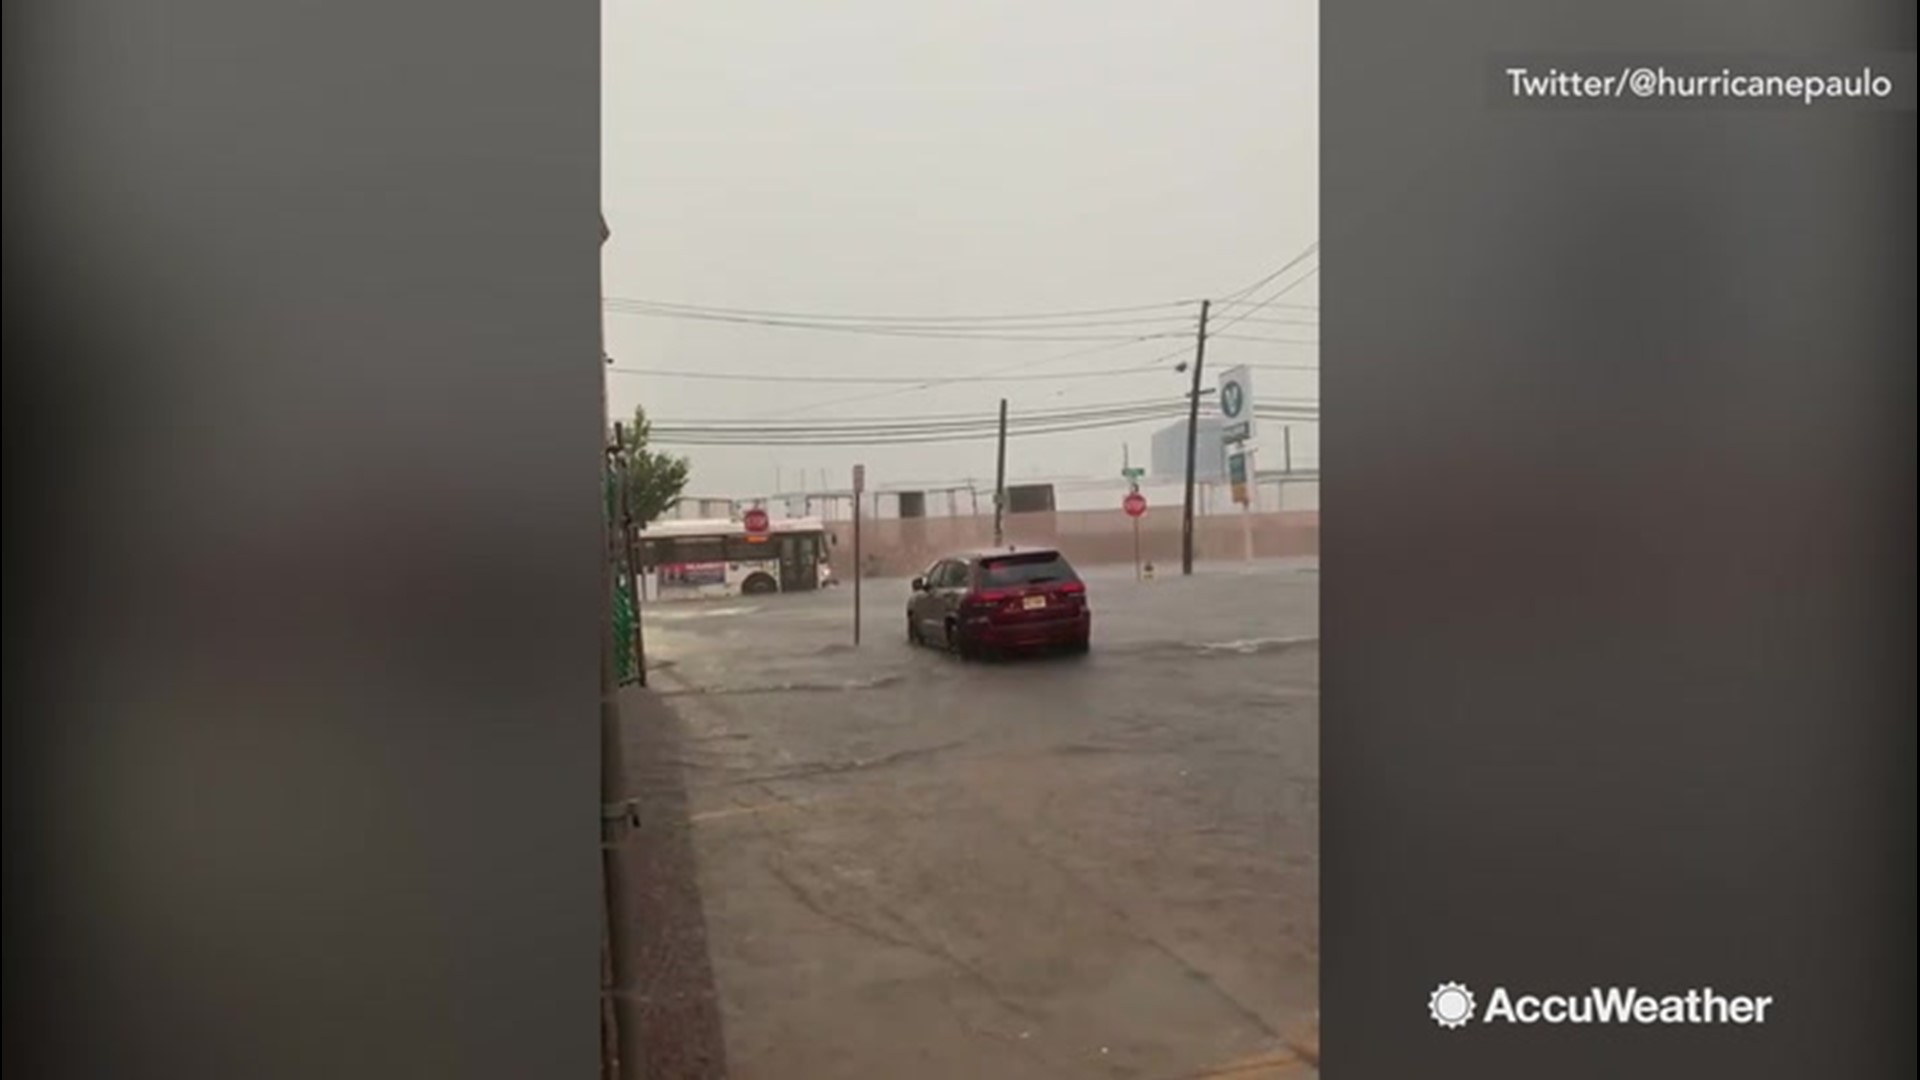 Flash flooding hit Newark, New Jersey on July 22. We do not suggest trying to drive in these conditions, as pictured here.